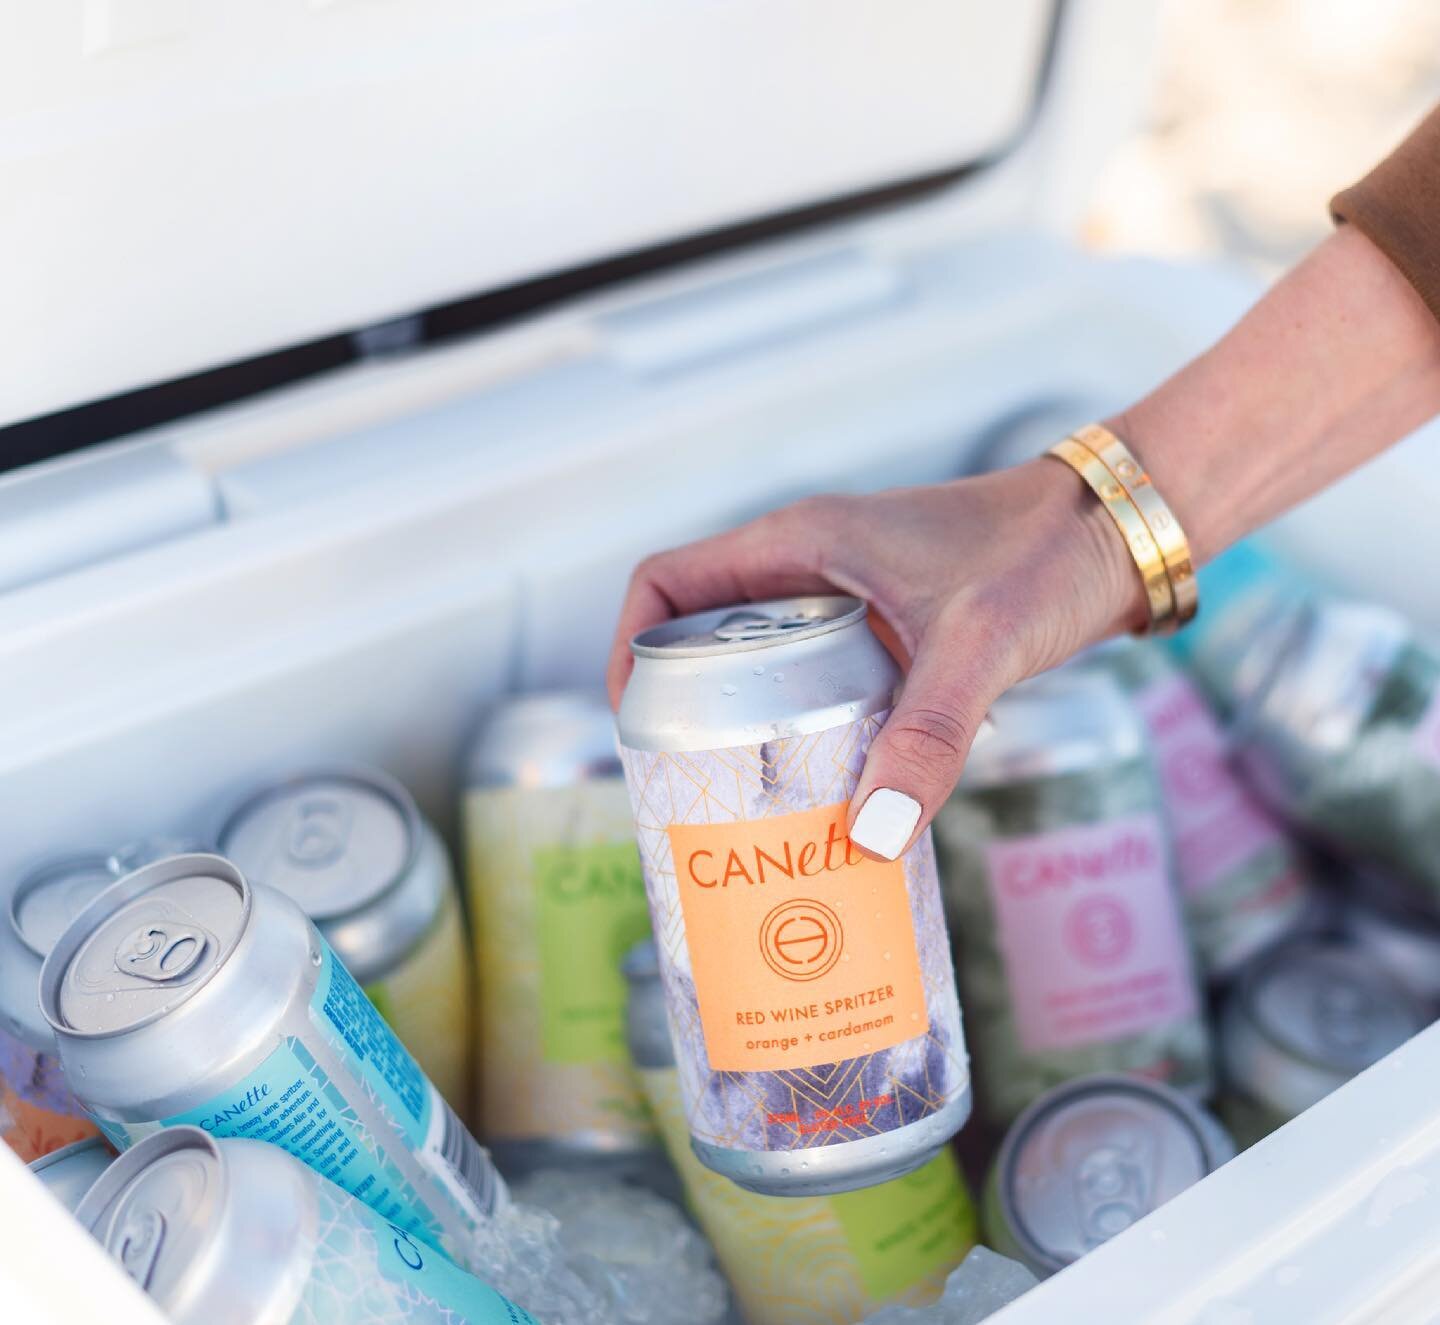 Our open bar at social gatherings constitutes of @yeti coolers loaded with ice &amp; #CANette. 🧊 

Photo credit: 
@your_wand 
@hamptonsaristocrat